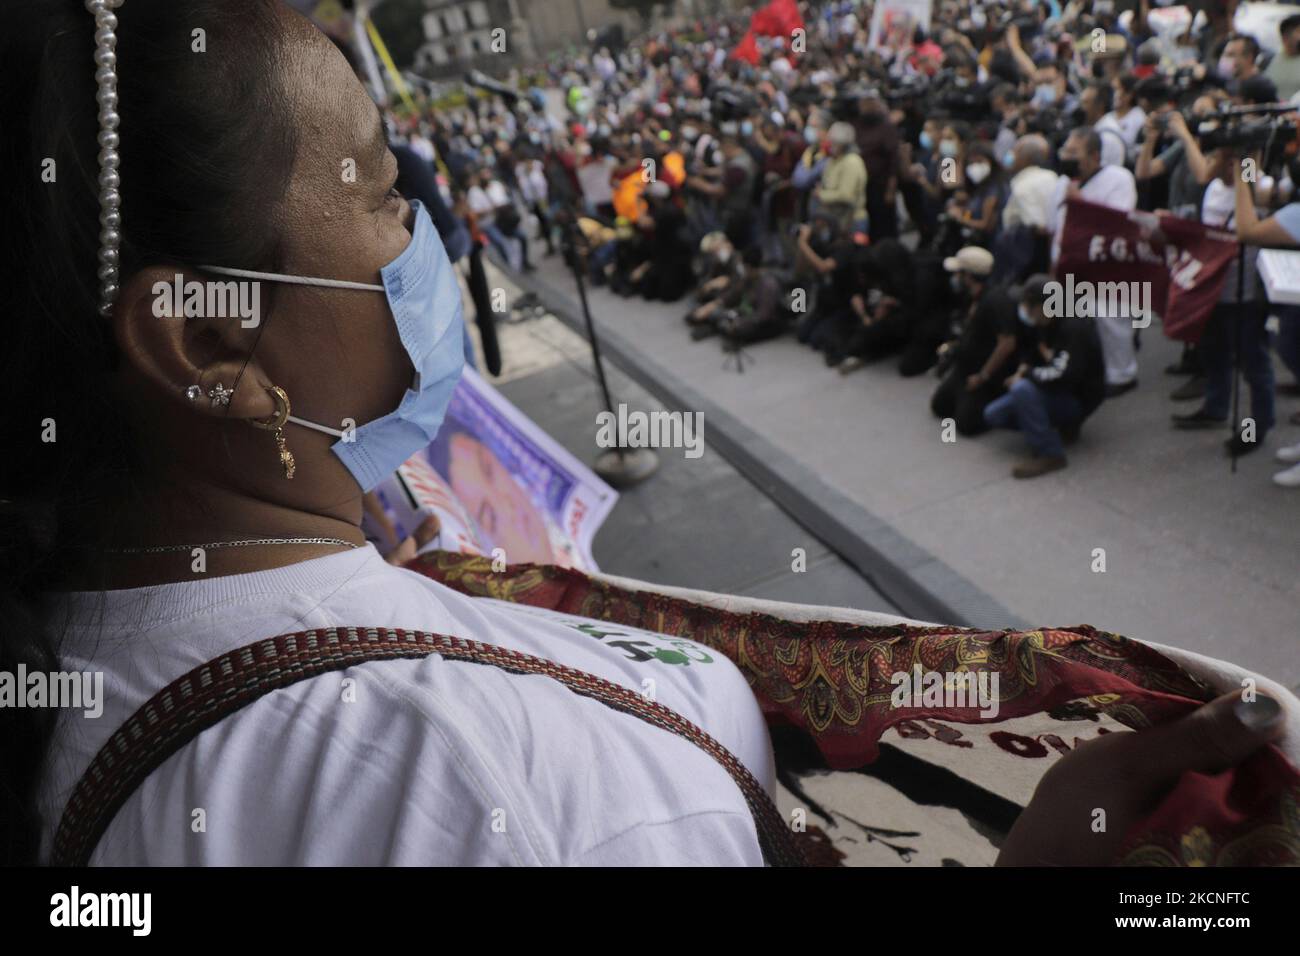 Mothers and fathers of the 43 missing students from Ayotzinapa, Guerrero, held a rally in the Zócalo in Mexico City to demand justice and punishment for those responsible for this event, which is seven years after its perpetration on 26 September 2014. (Photo by Gerardo Vieyra/NurPhoto) Stock Photo